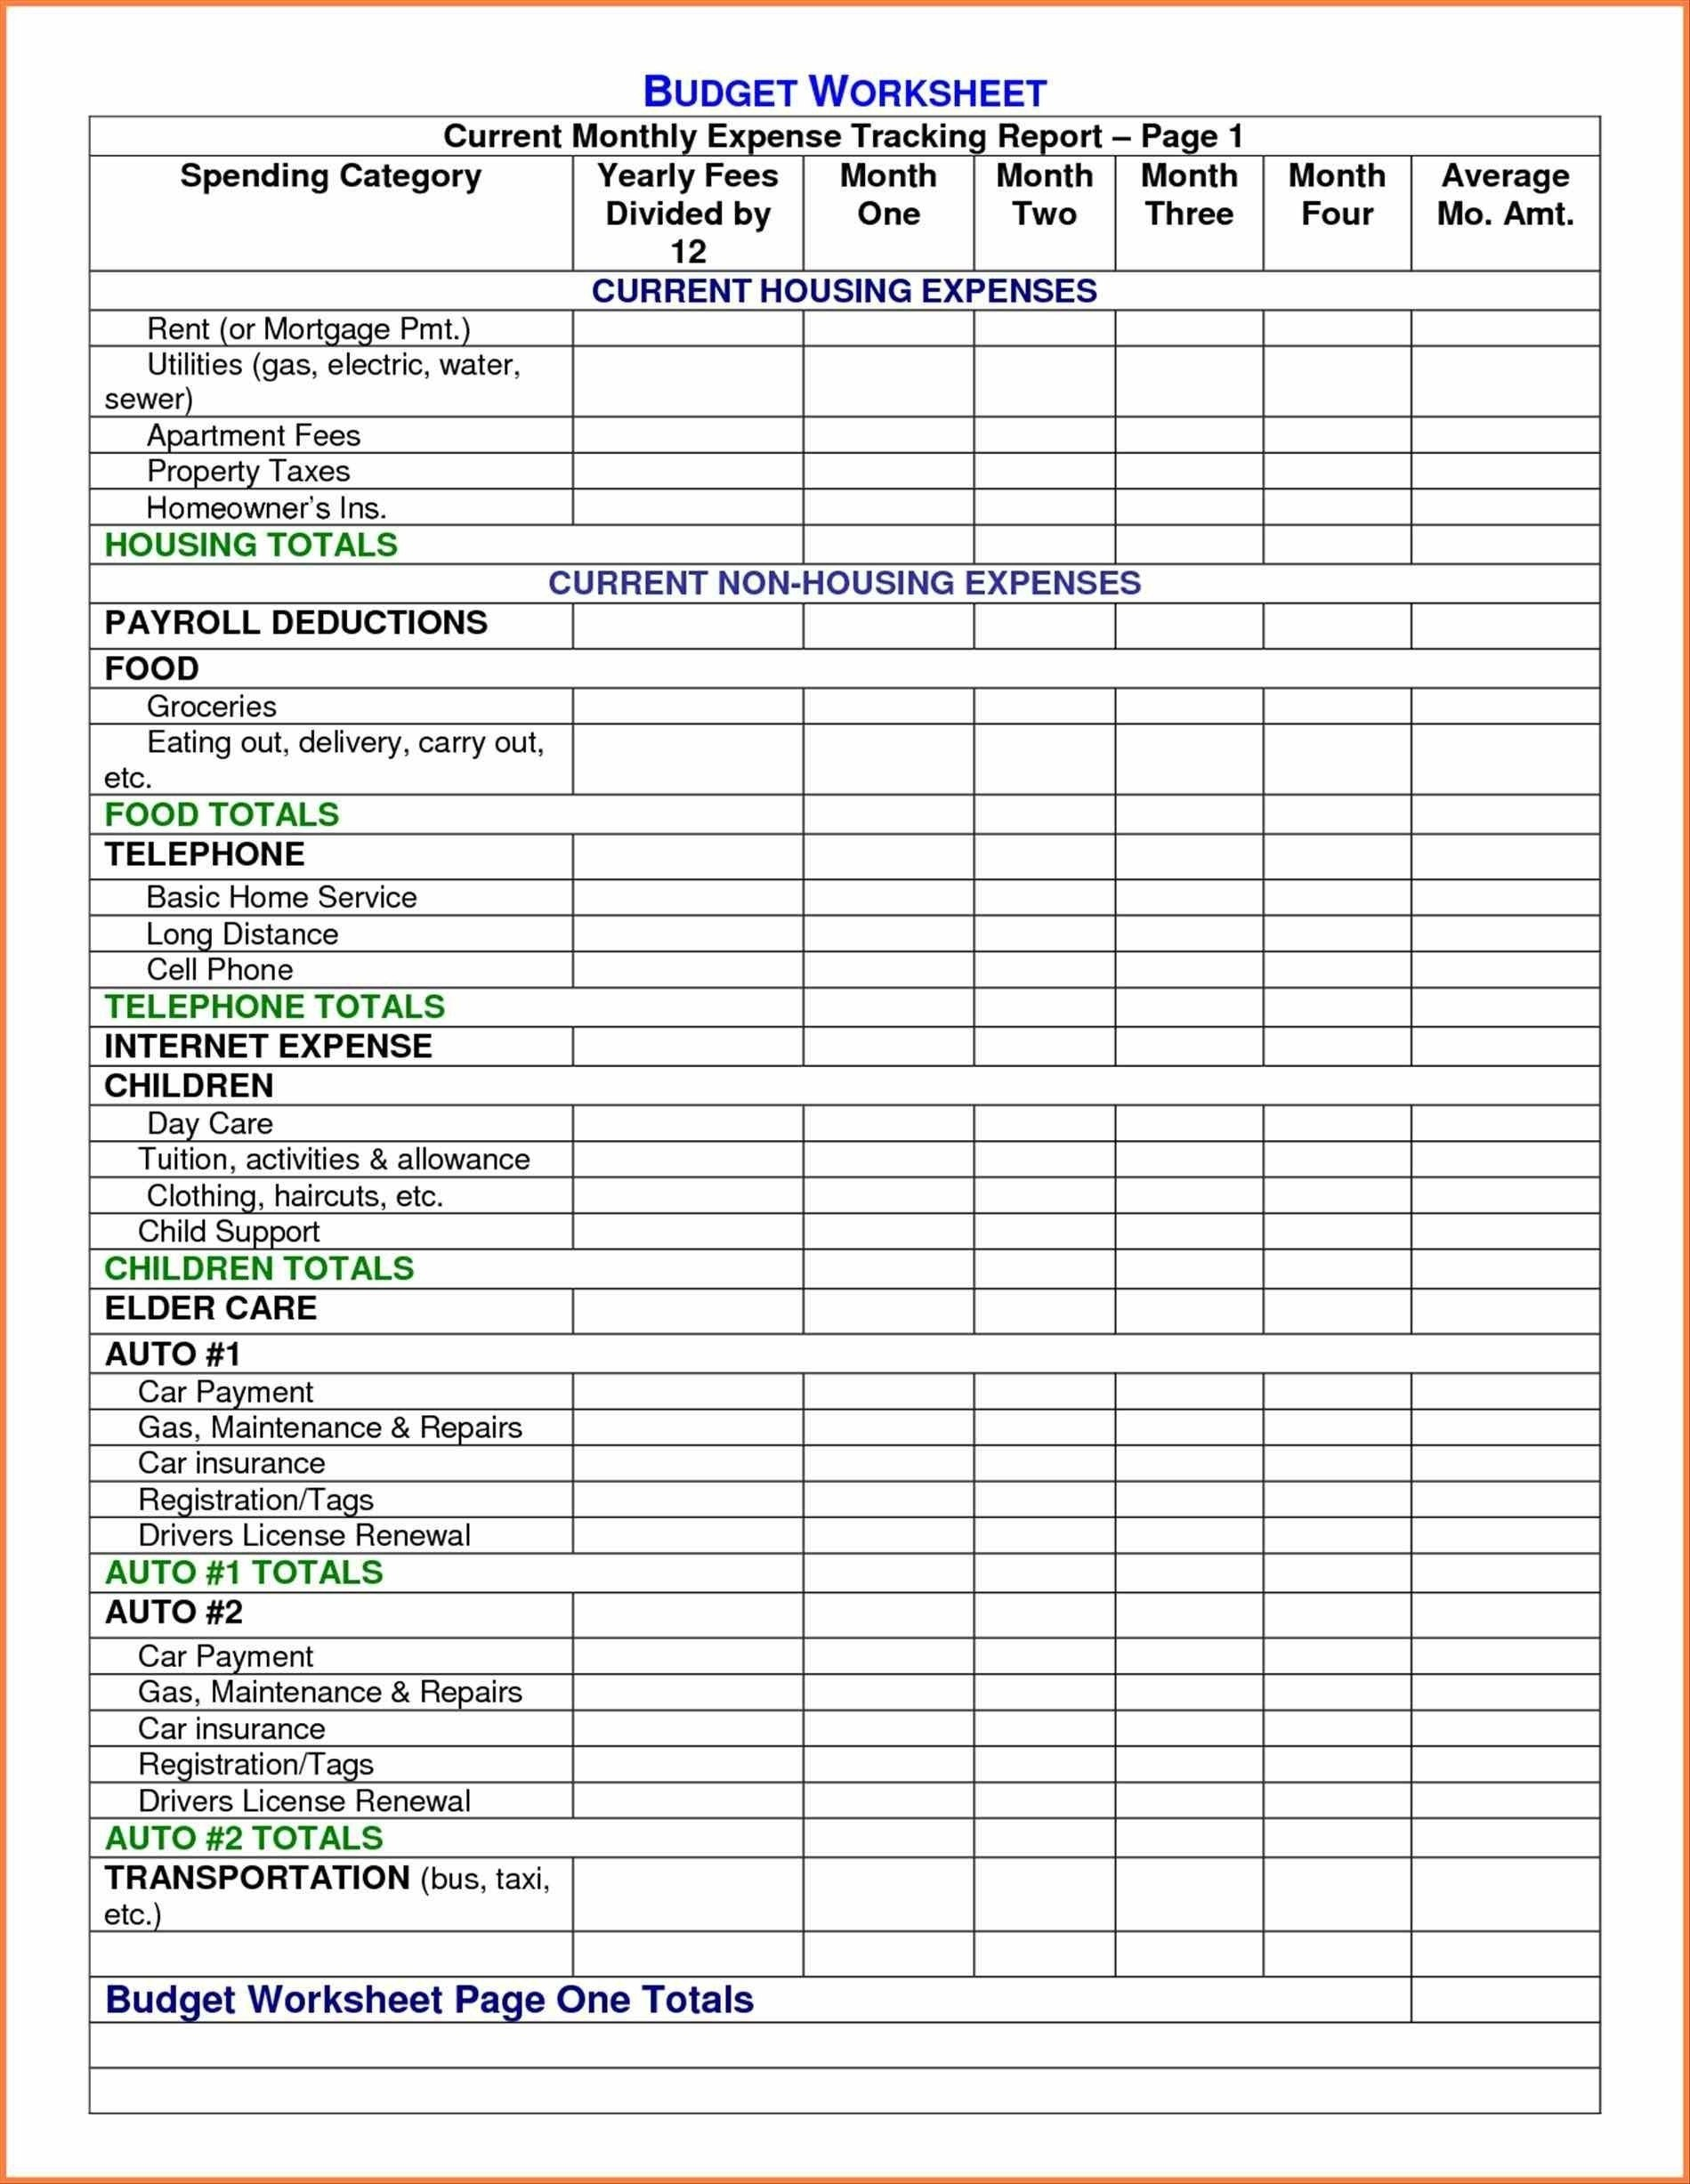 Free Accounting Spreadsheet Templates For Small Business Cash Flowe inside Free Excel Spreadsheet Templates For Small Business